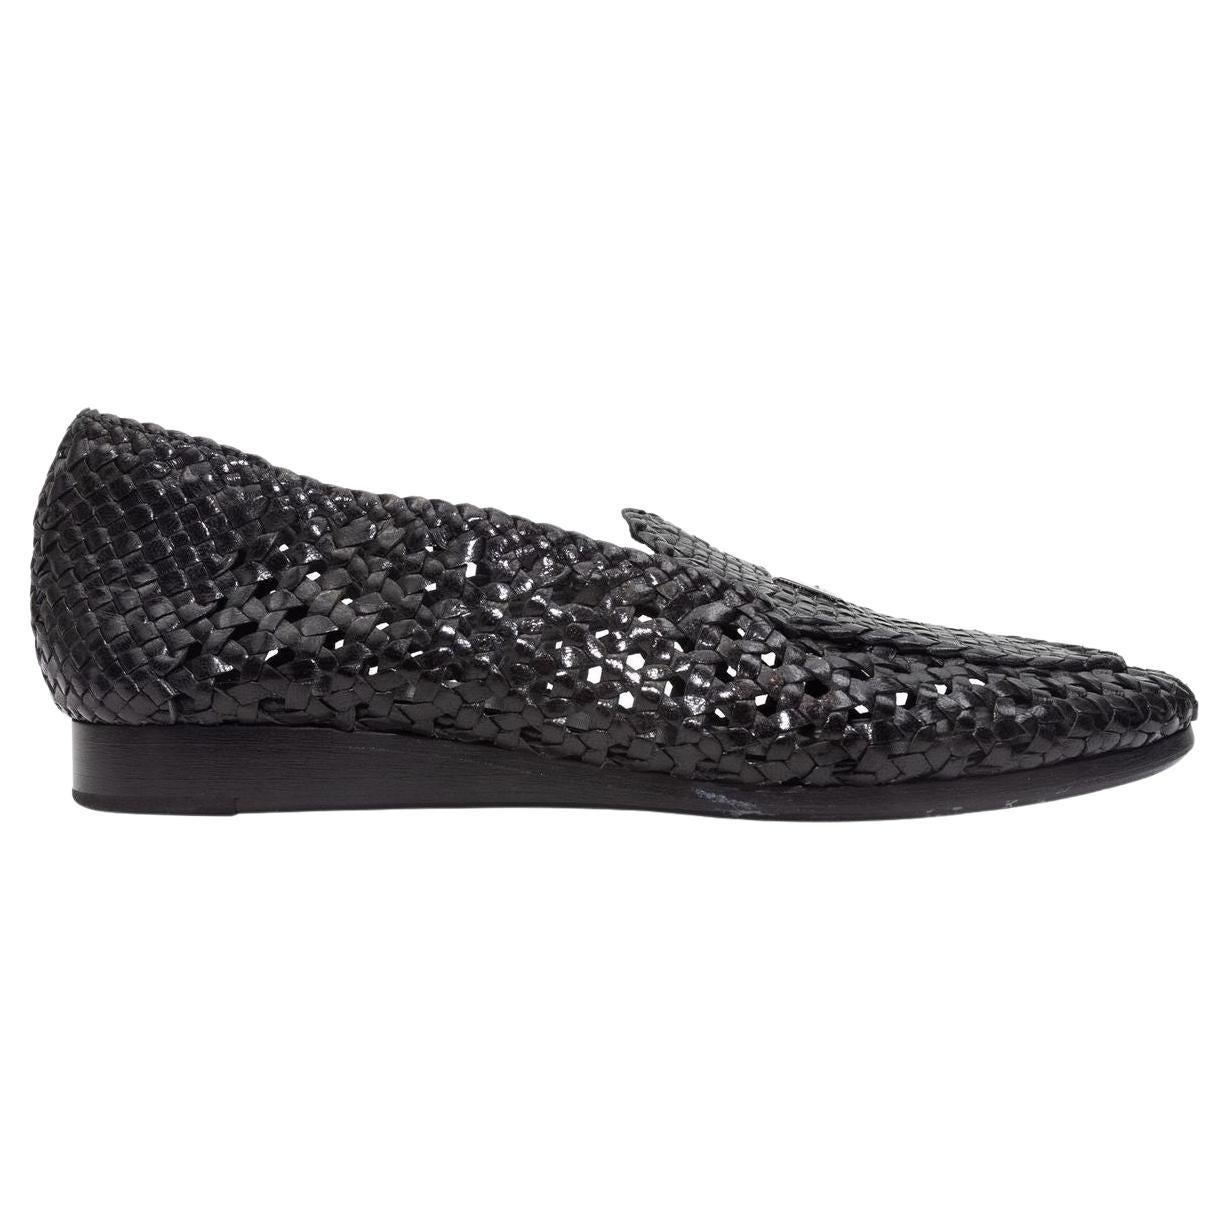 Alyx Black  St. Marks Woven Leather Loafers